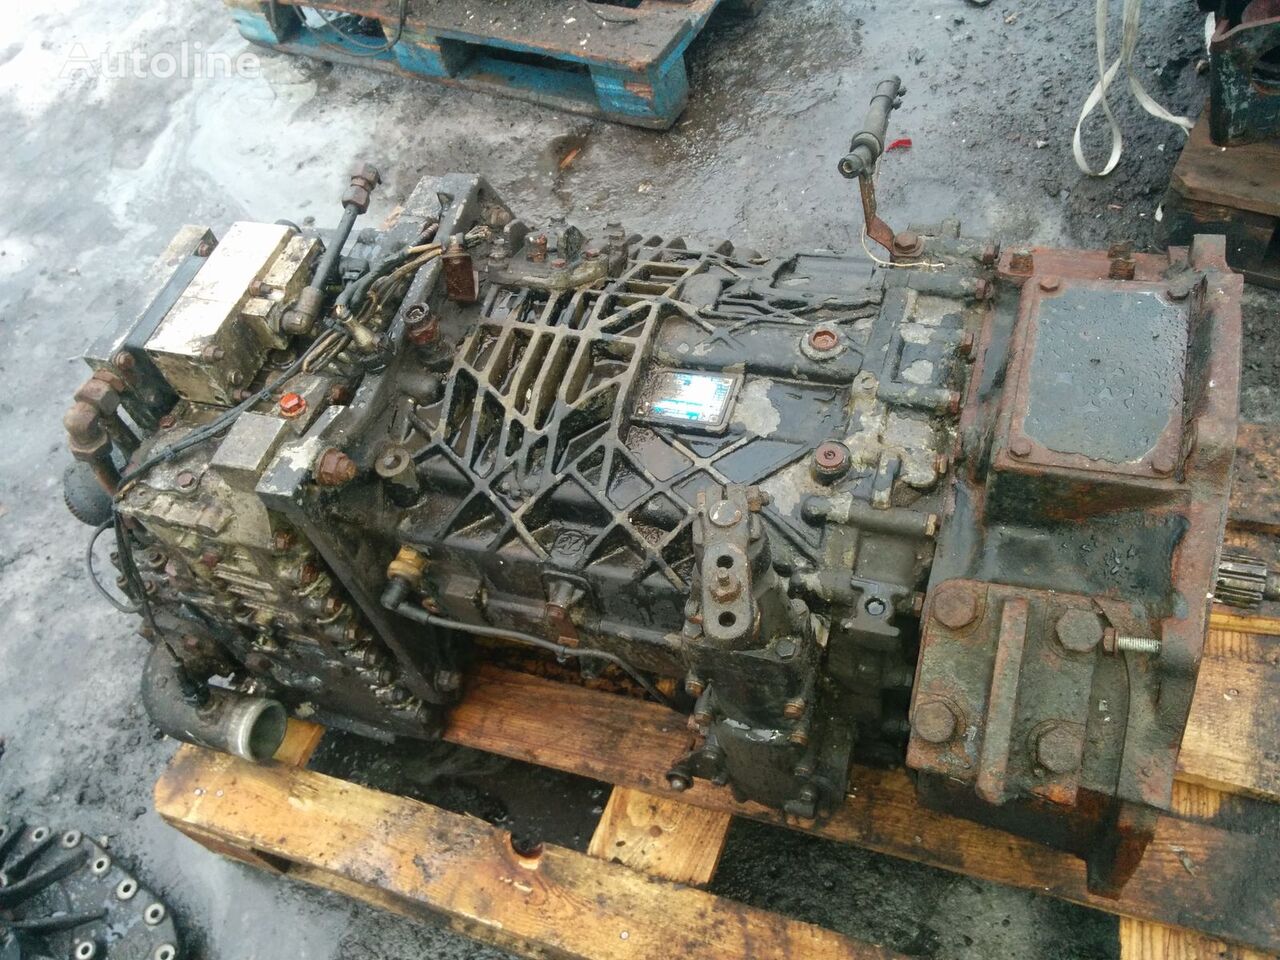 ZF S6 85+GV80 S6- GV90 gearbox for Setra 315 bus